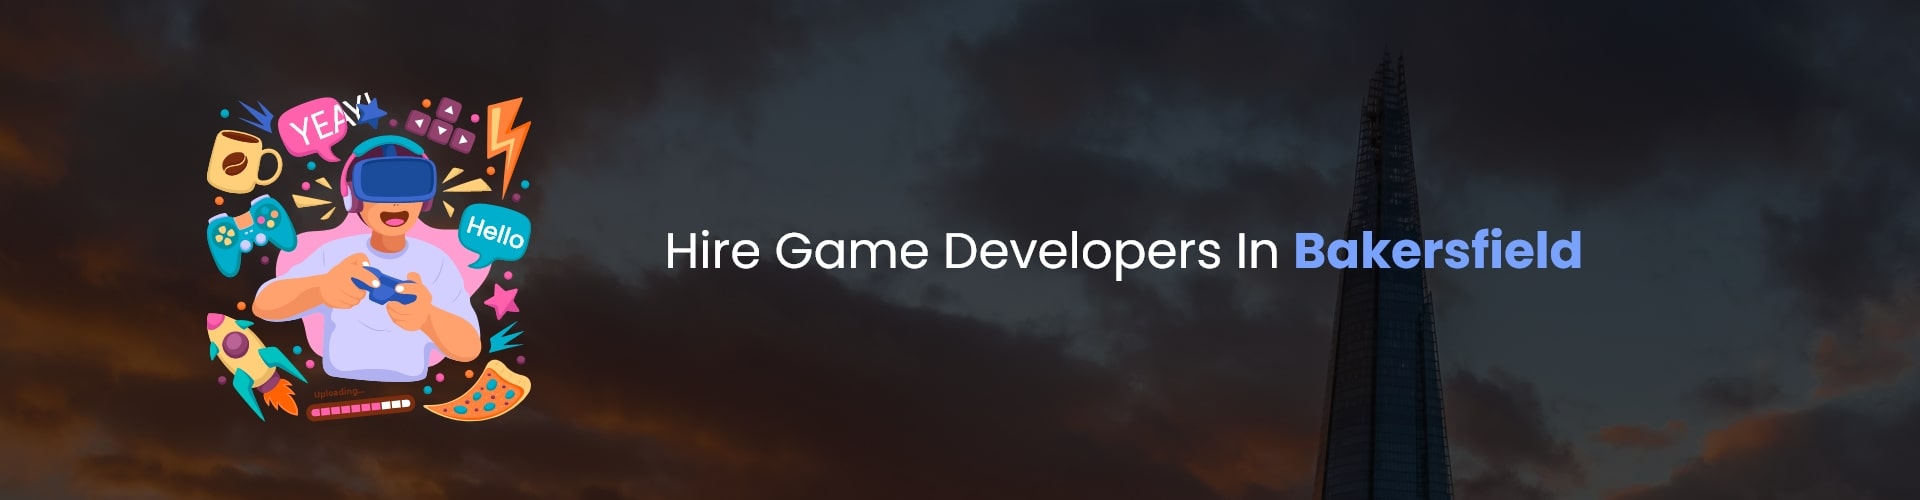 hire game developers in bakersfield